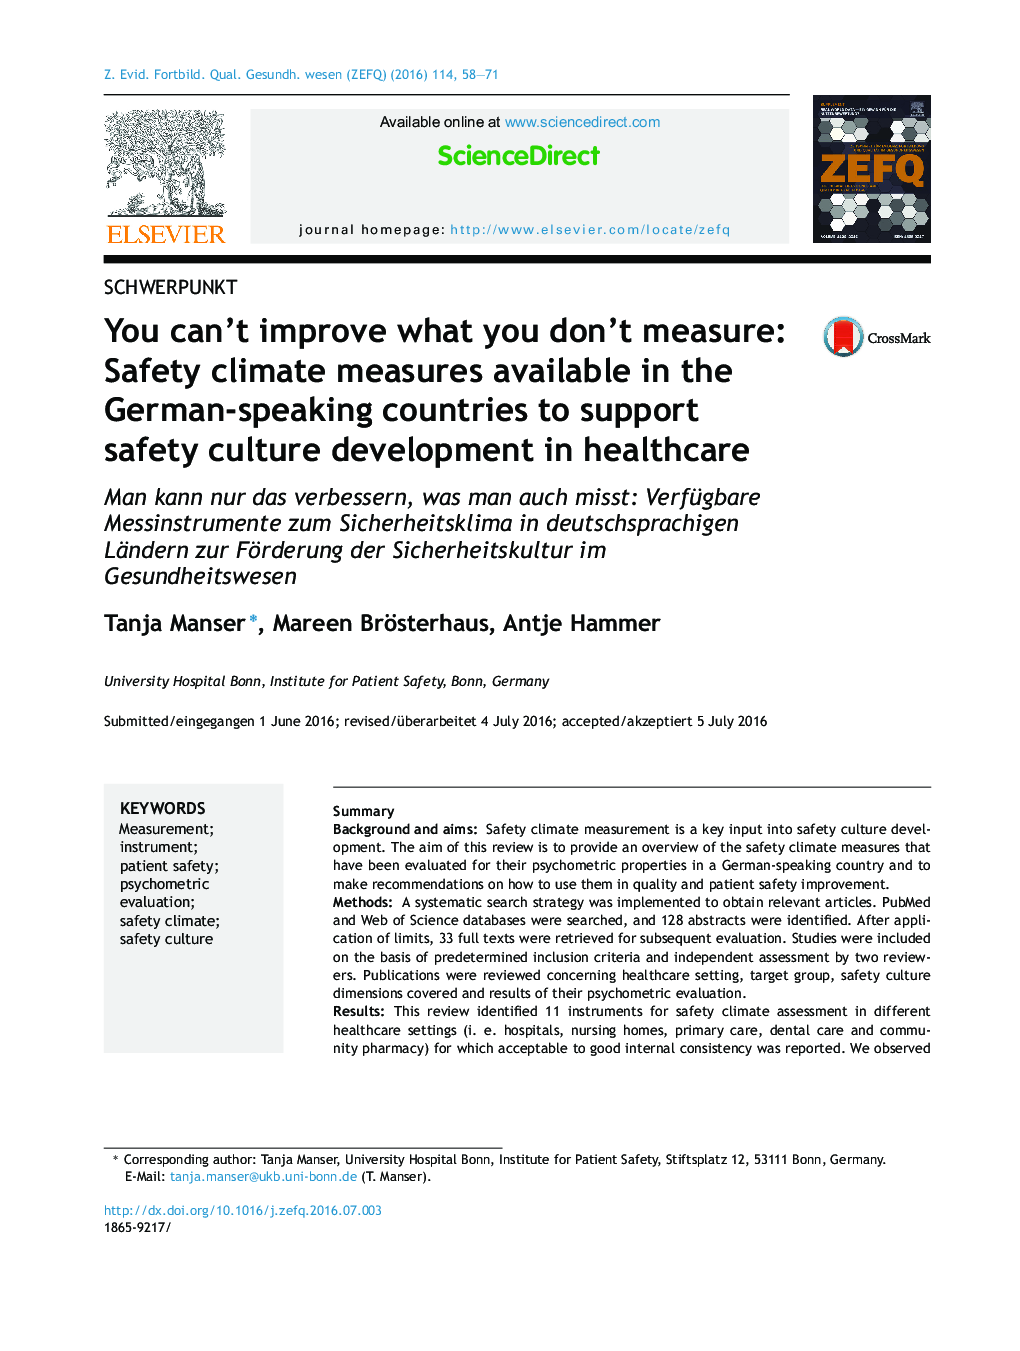 You can’t improve what you don’t measure: Safety climate measures available in the German-speaking countries to support safety culture development in healthcare